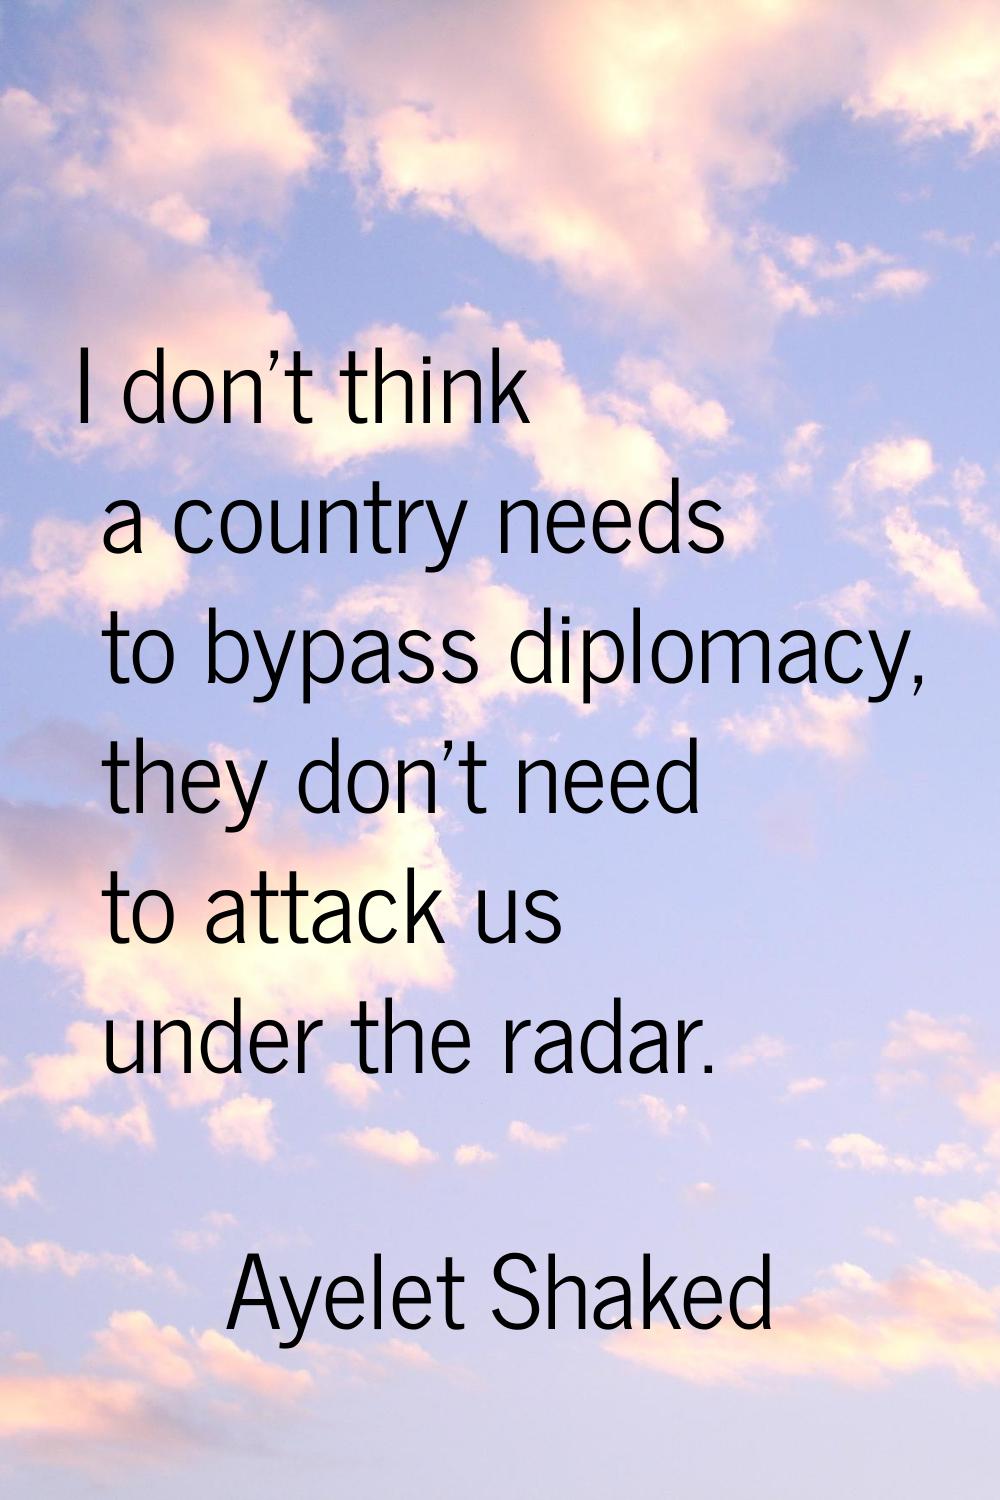 I don't think a country needs to bypass diplomacy, they don't need to attack us under the radar.